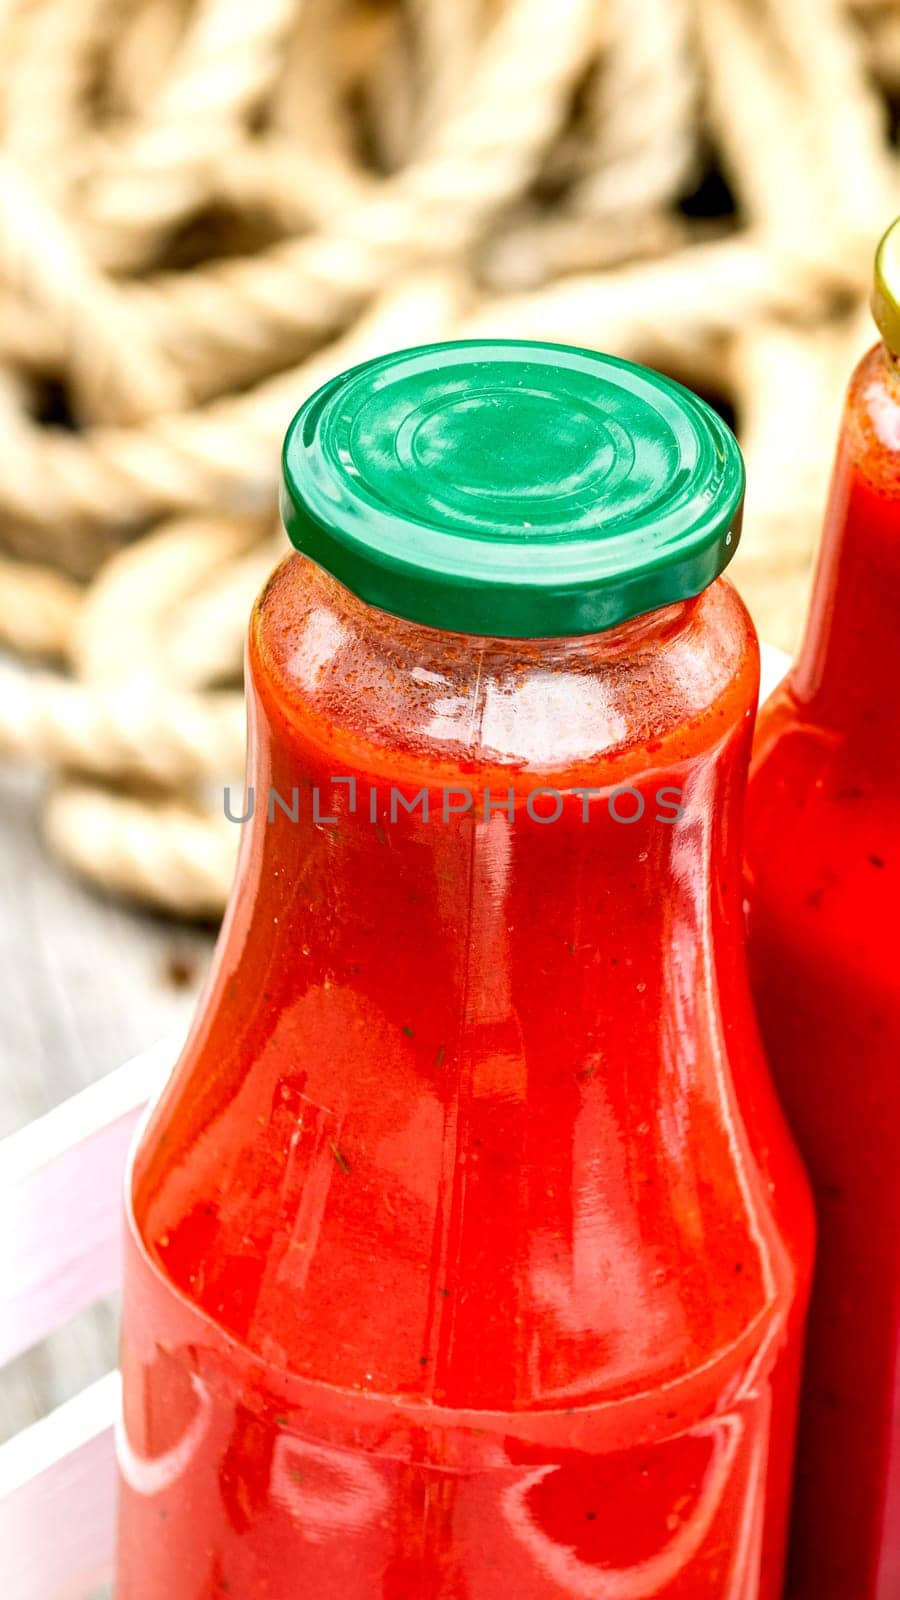 Bottles of tomato sauce, preserved canned pickled food concept isolated in a rustic composition. by vladispas